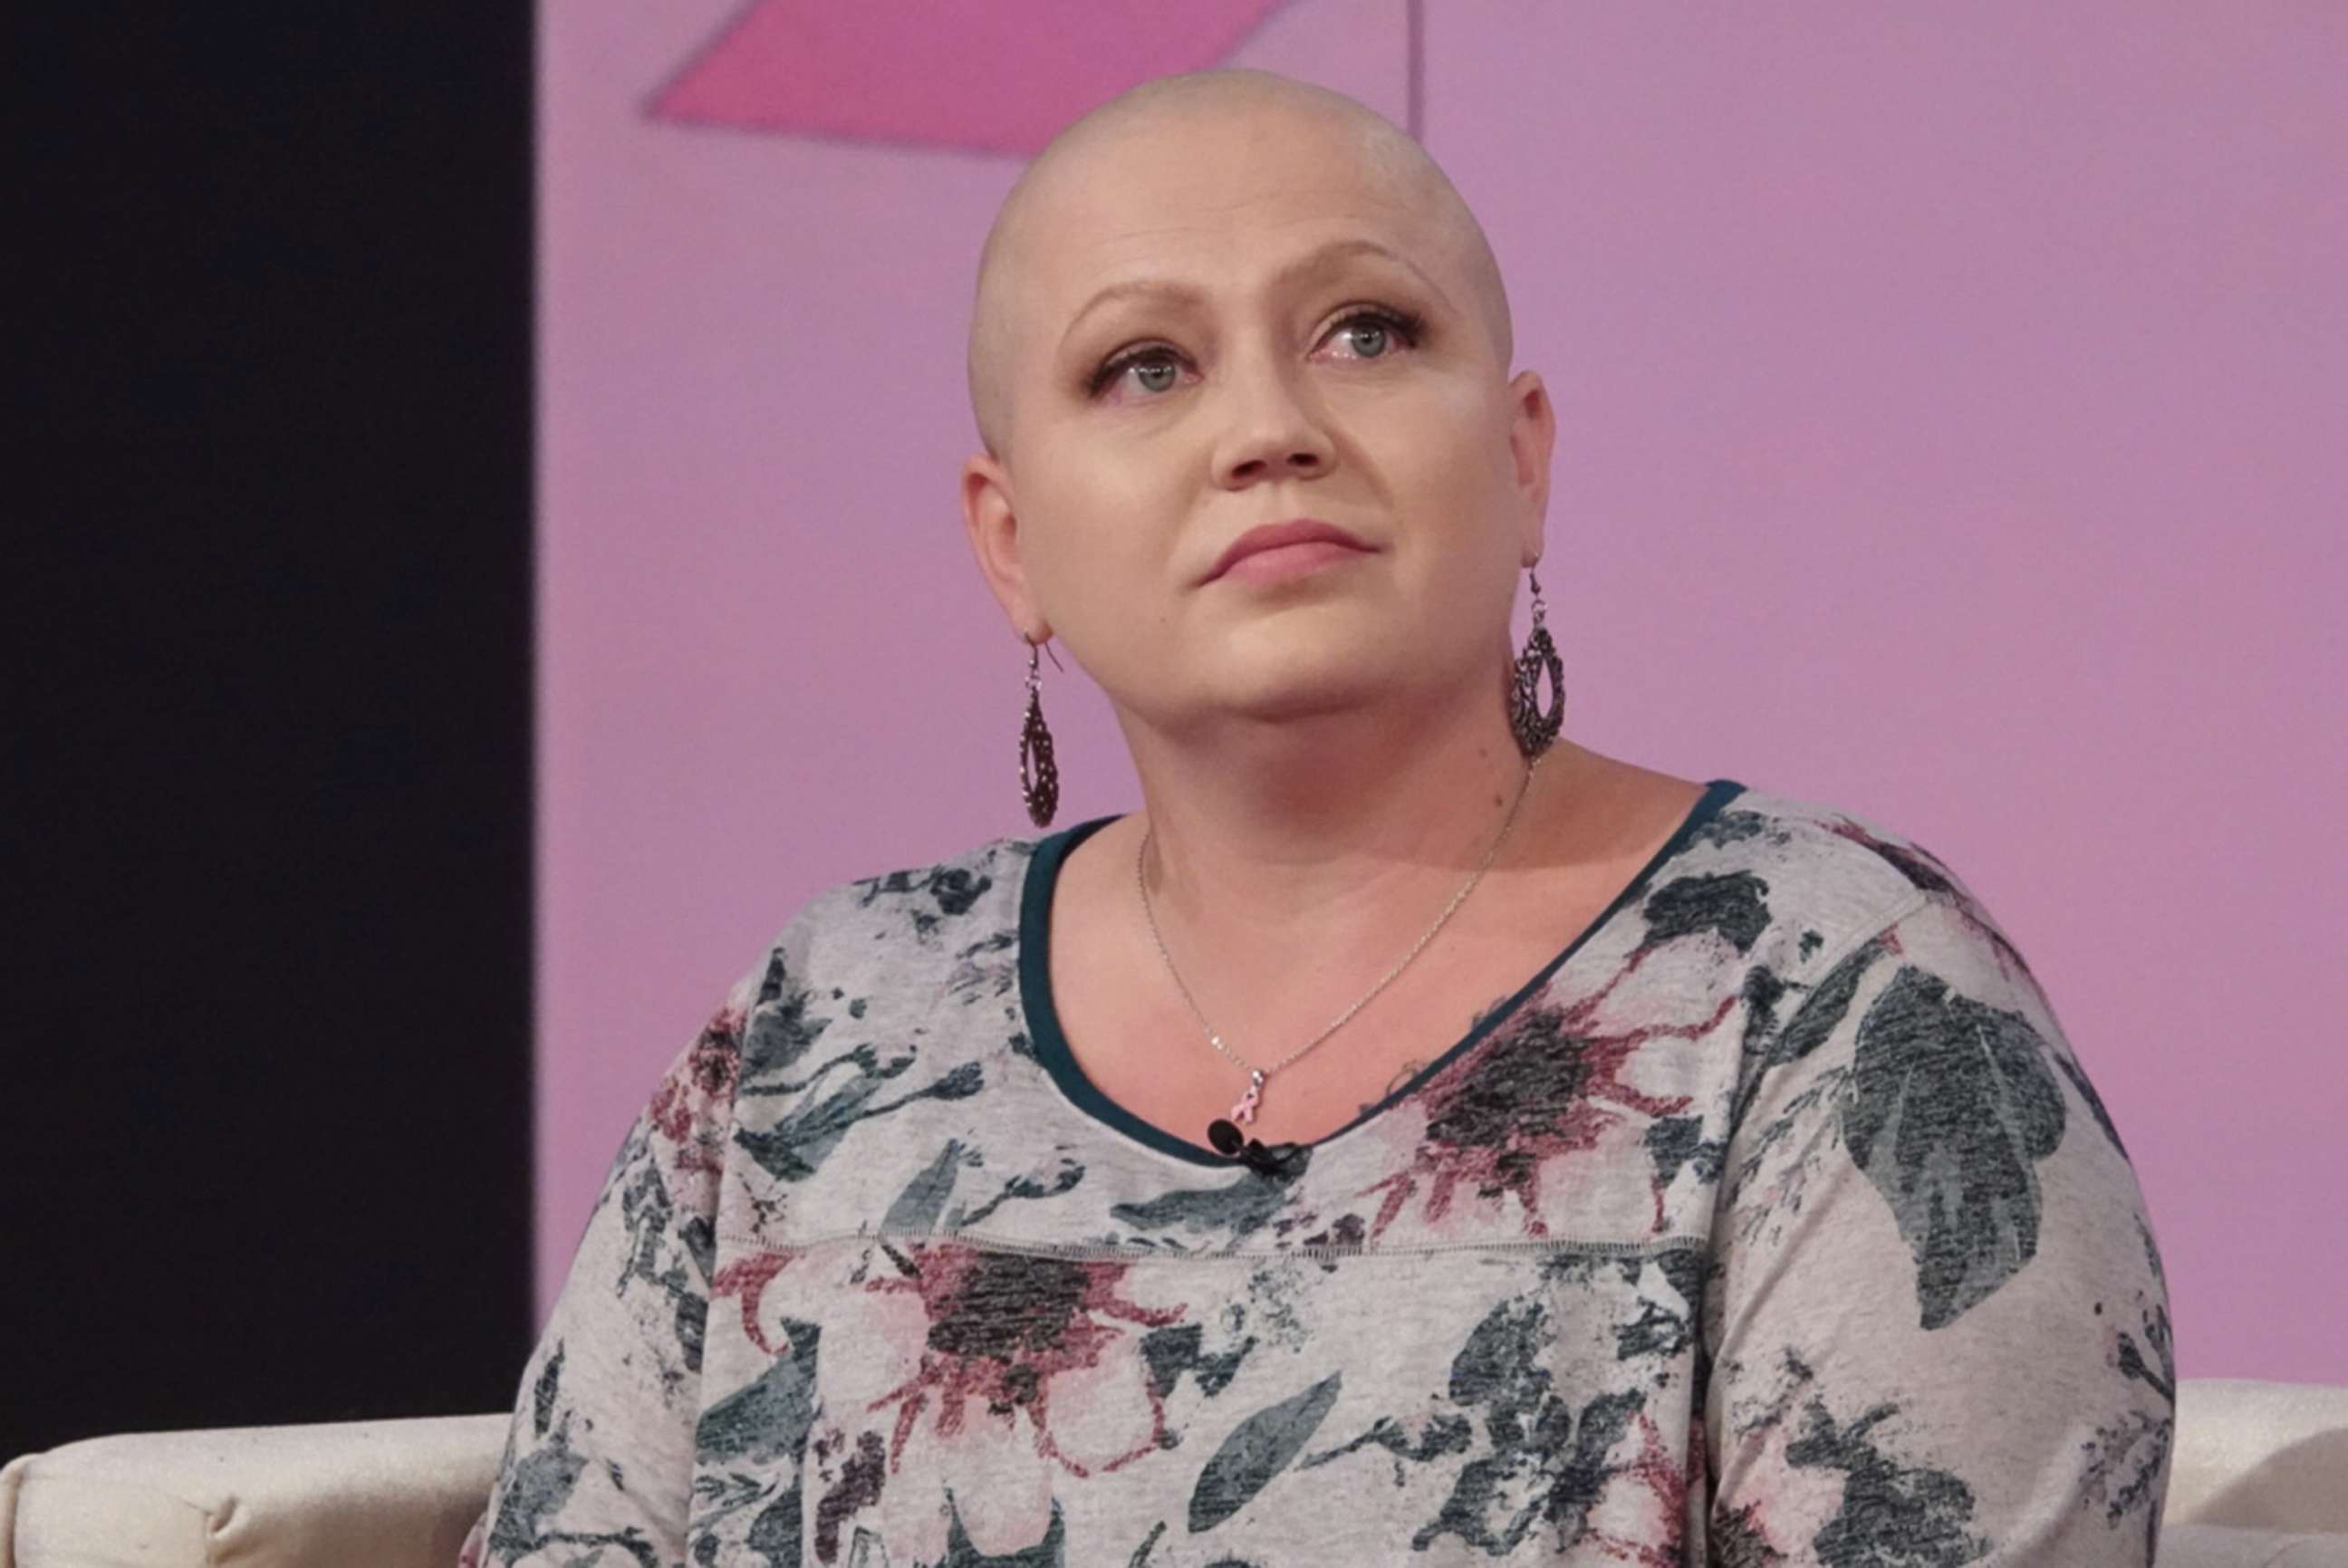 PHOTO: Breast cancer patient Sarah Weimer opens up about her breast cancer journey on "The View" on Oct. 17, 2019, for Breast Cancer Awareness Month.